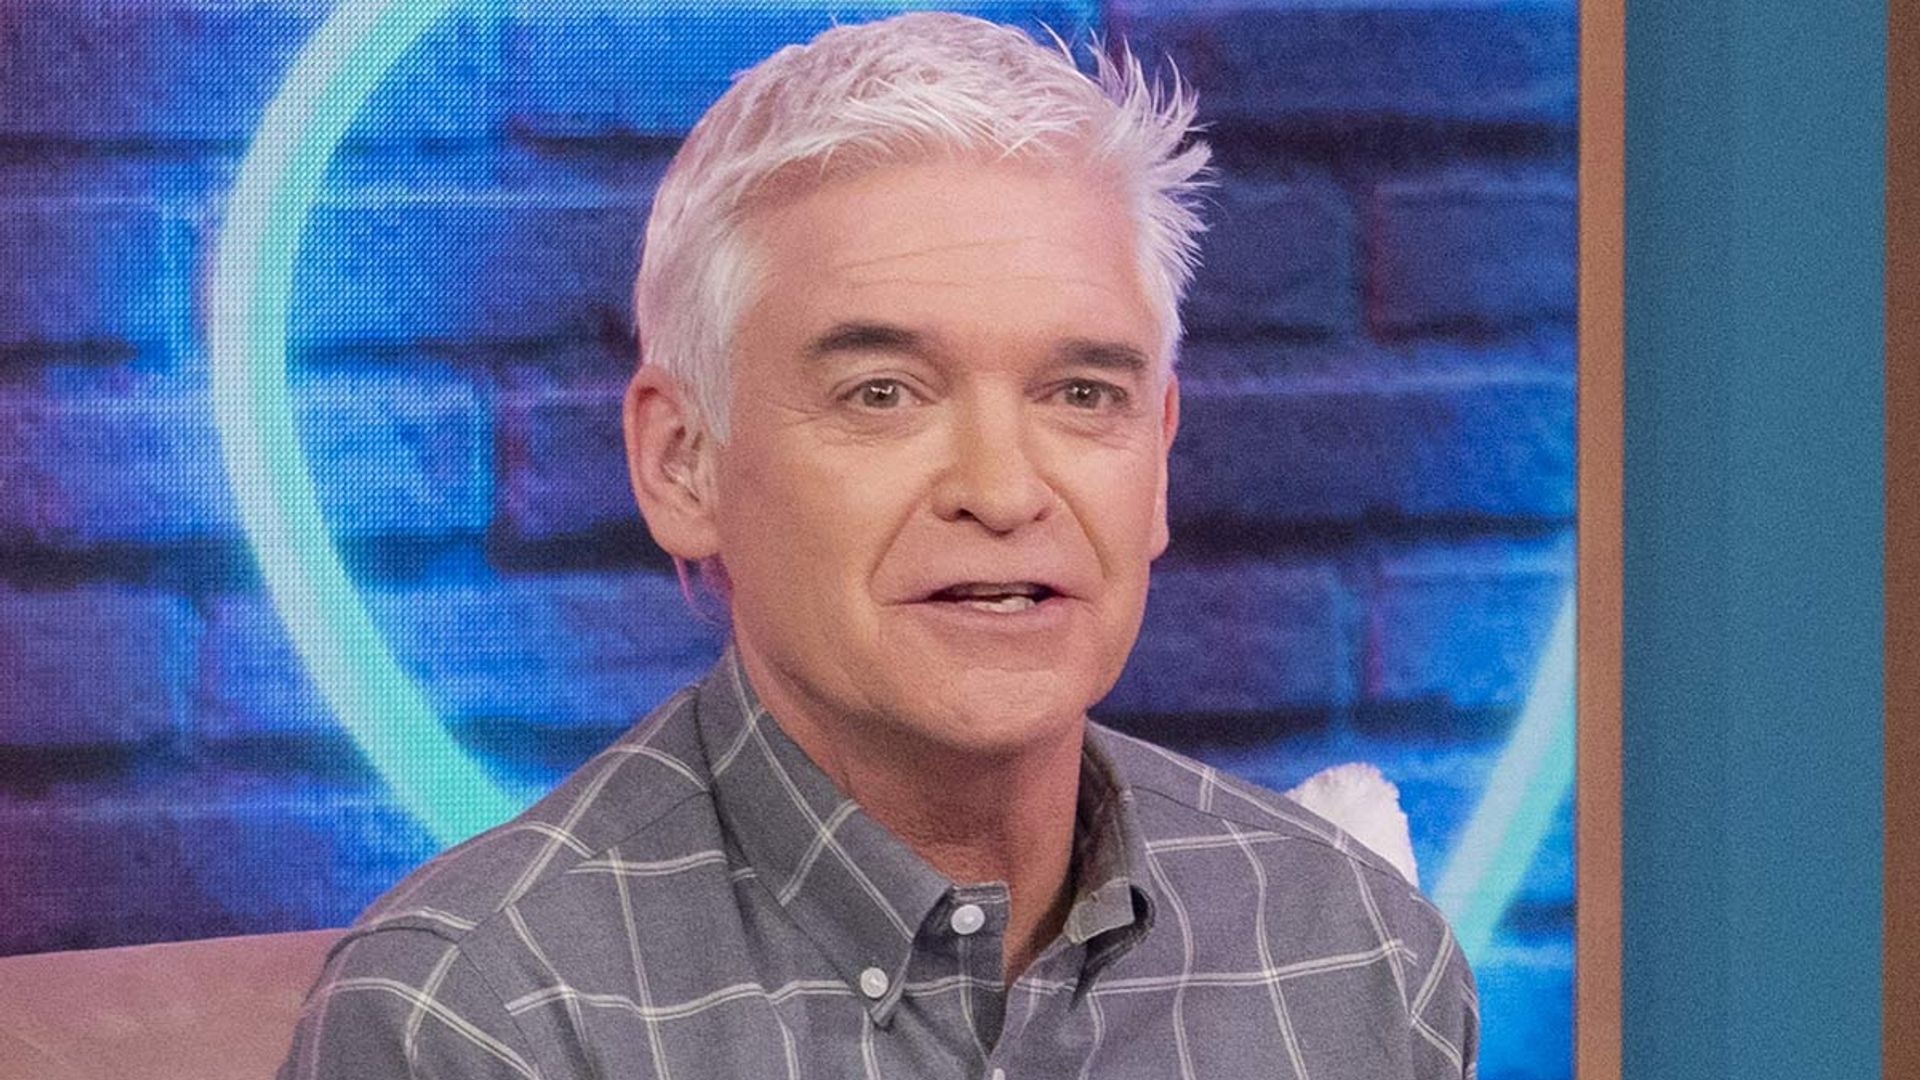 Phillip Schofield's This Morning replacement announced after testing positive for COVID-19